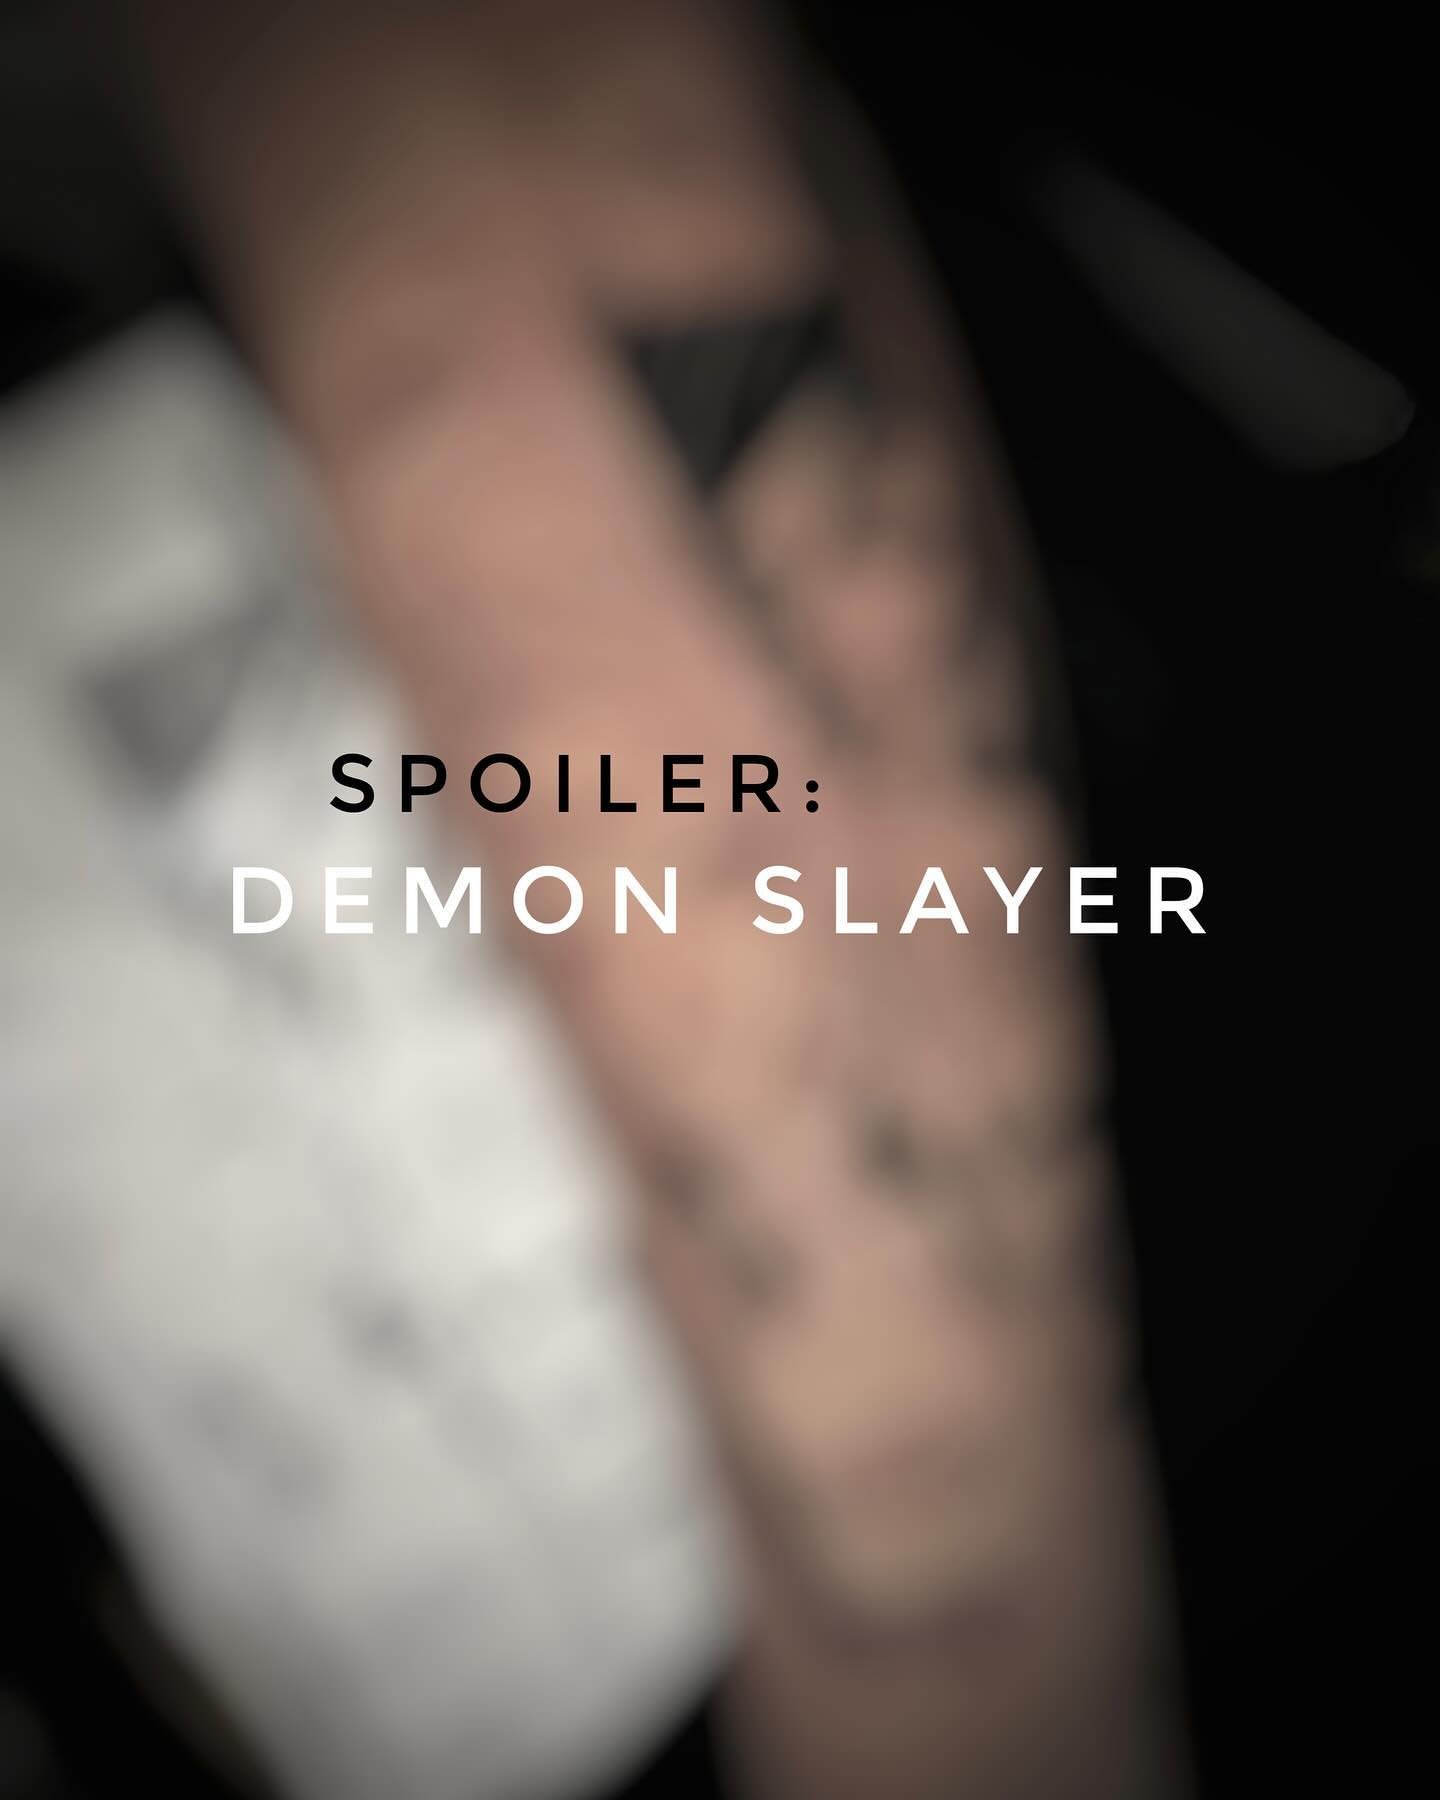 These panels have Demon Slayer spoilers so beware! 🖤 I had a blast doing them and am always so down to do anime/manga work ✨ thanks for looking! (Or not bc spoilers, but still grateful for a like/save/share 😅)
.
.
.
.
.
#demonslayer #animetattoo #m